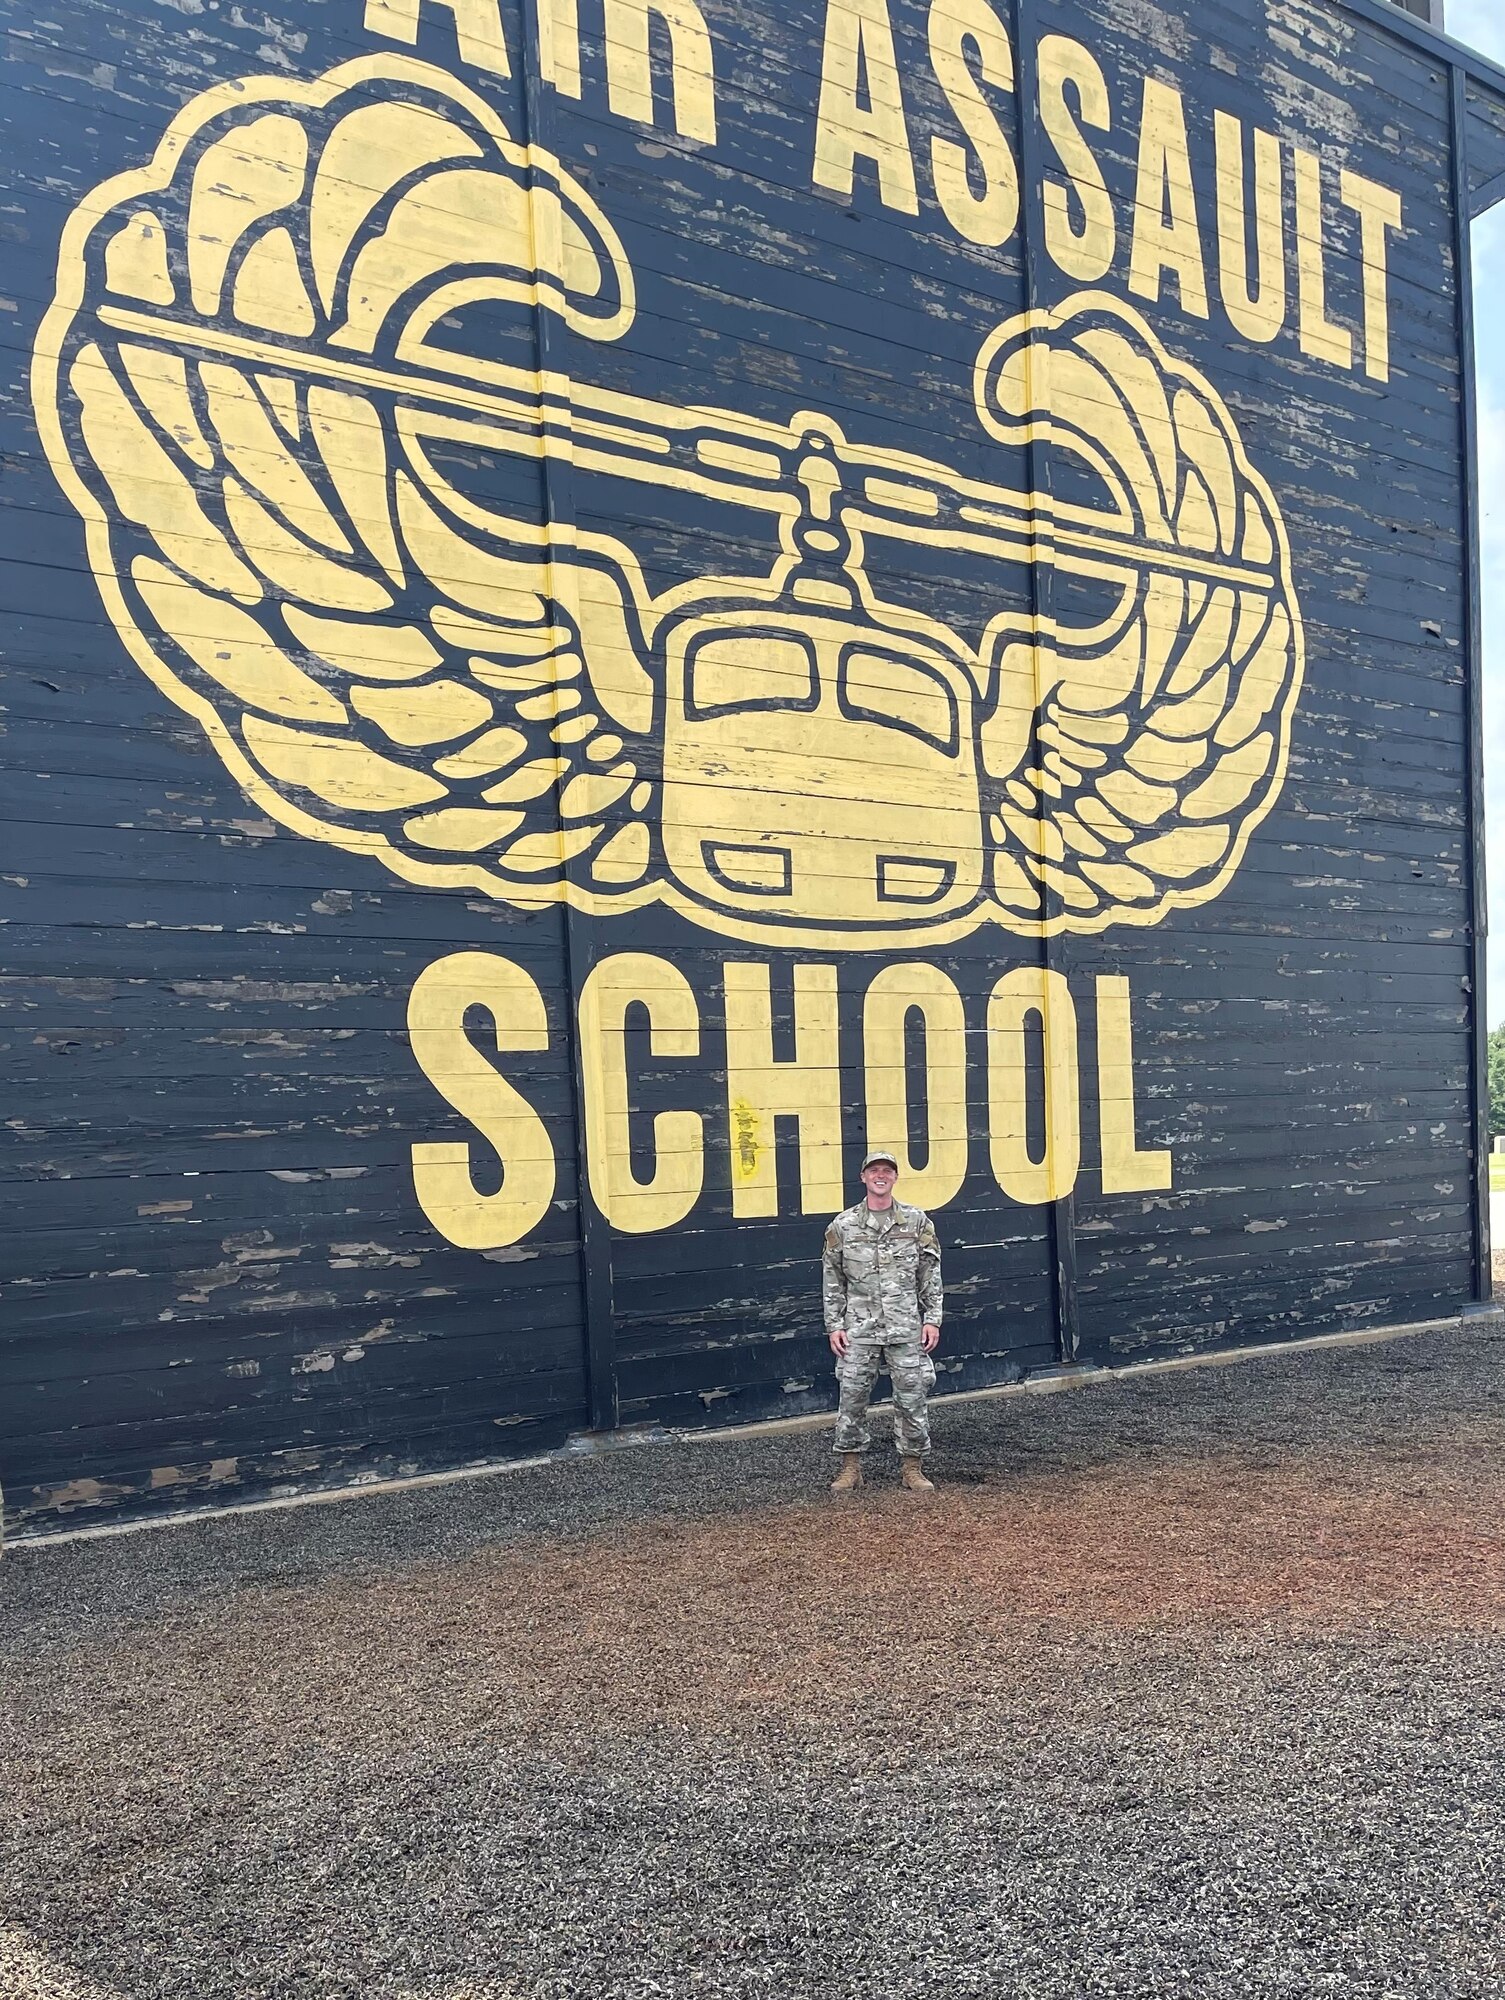 A photo of an Airman standing in front of the Army Air Assault School sign